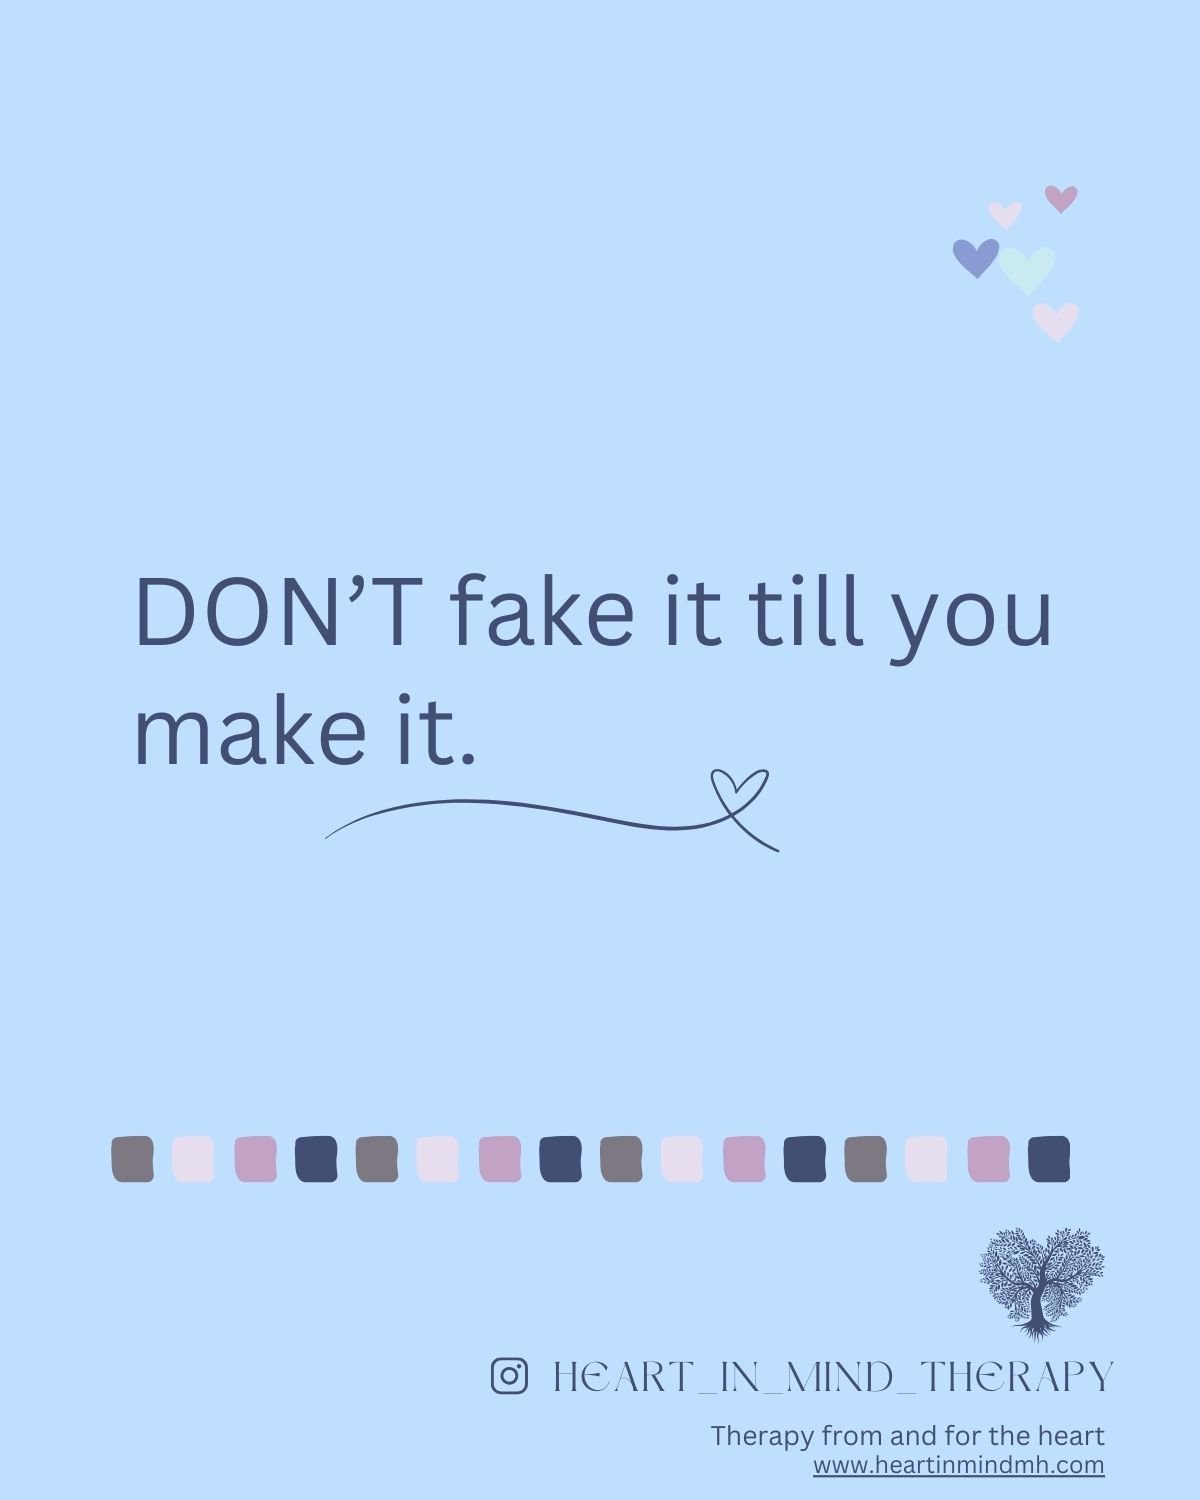 A continuation from the last post...

How many of us have heard something like, &quot;Fake it 'till ya make it&quot;? Often, this is said in good faith/with good intentions of trying to encourage us to take chances when we're doubting ourselves. At b